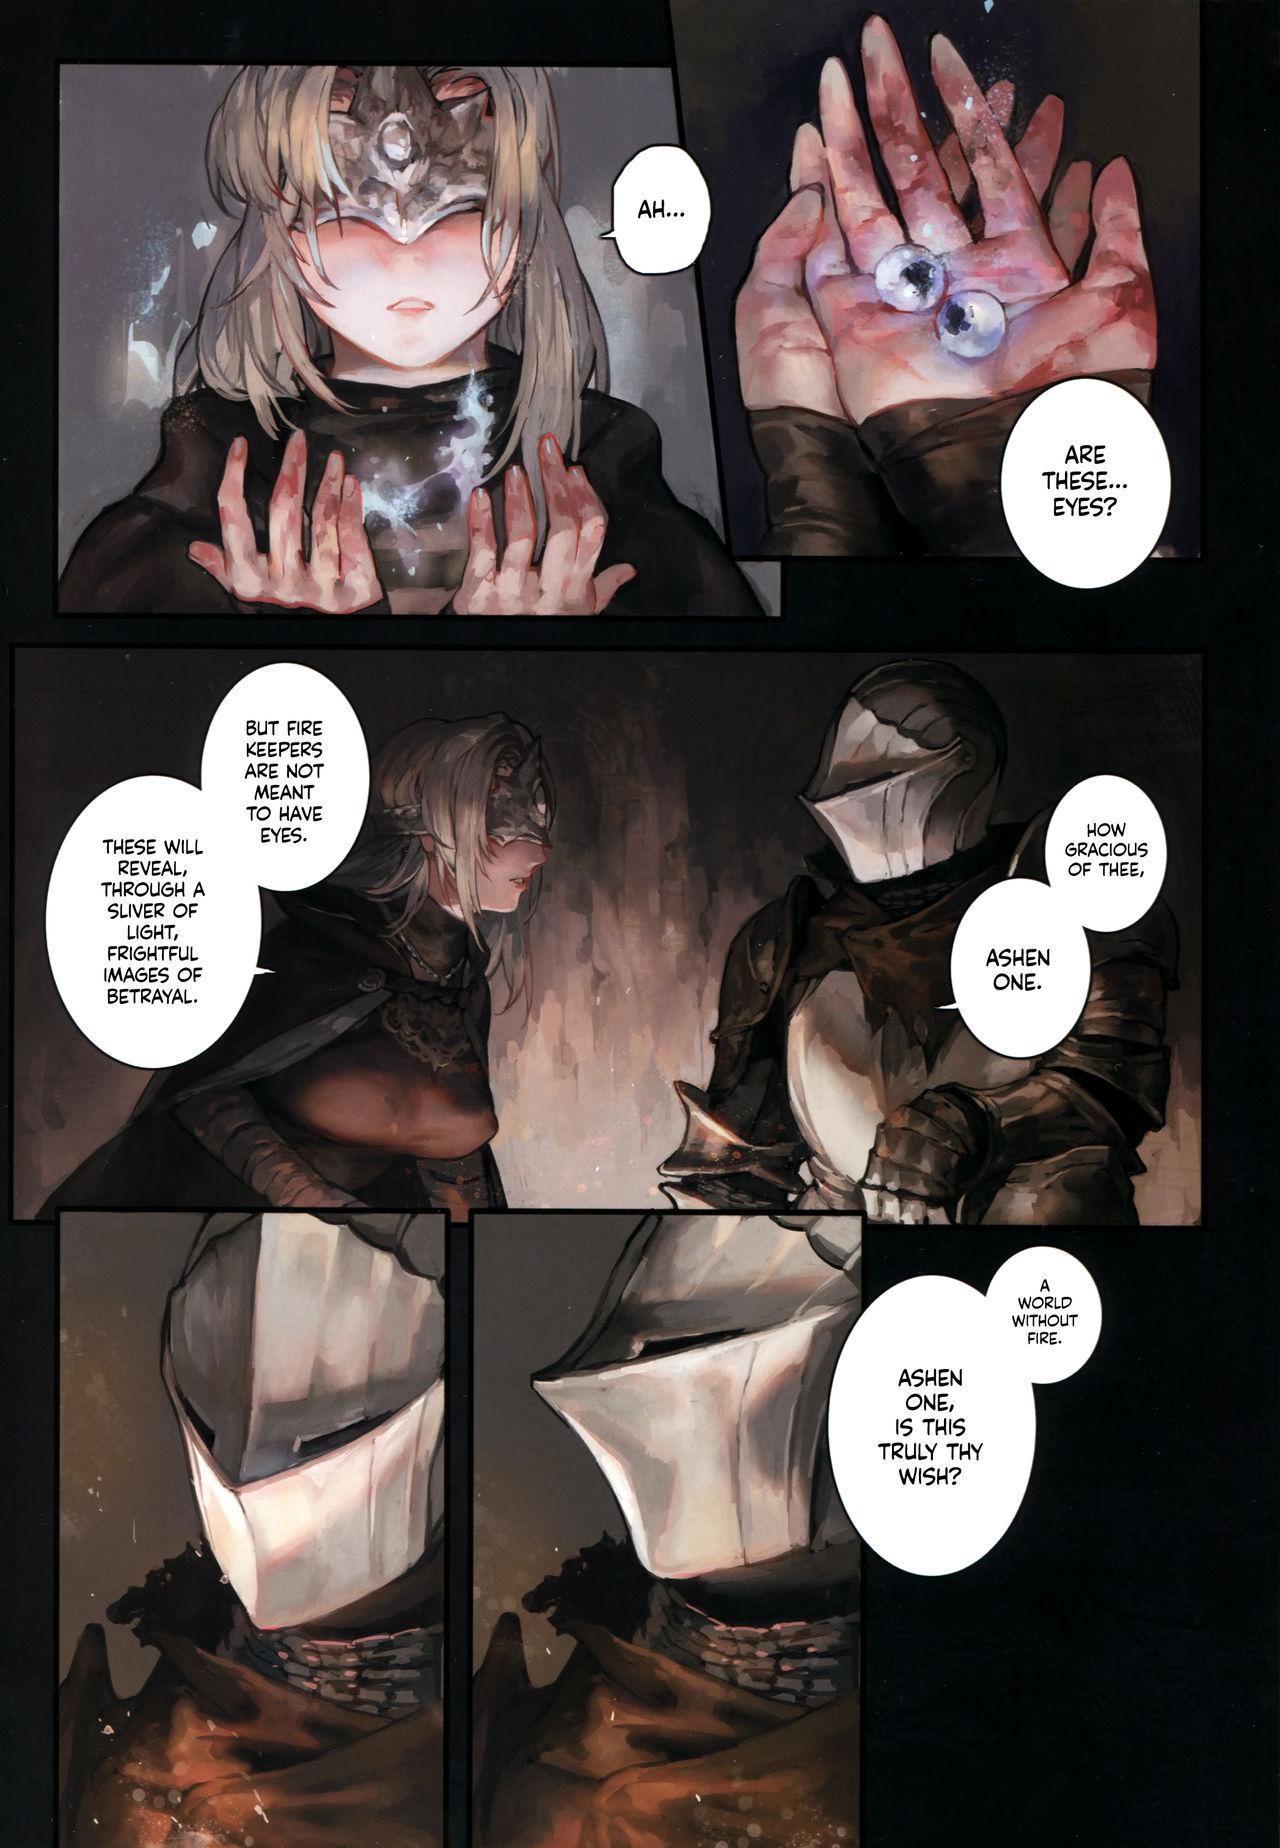 Edging Dark Desire - Demons souls Tight Pussy Fucked - Page 7